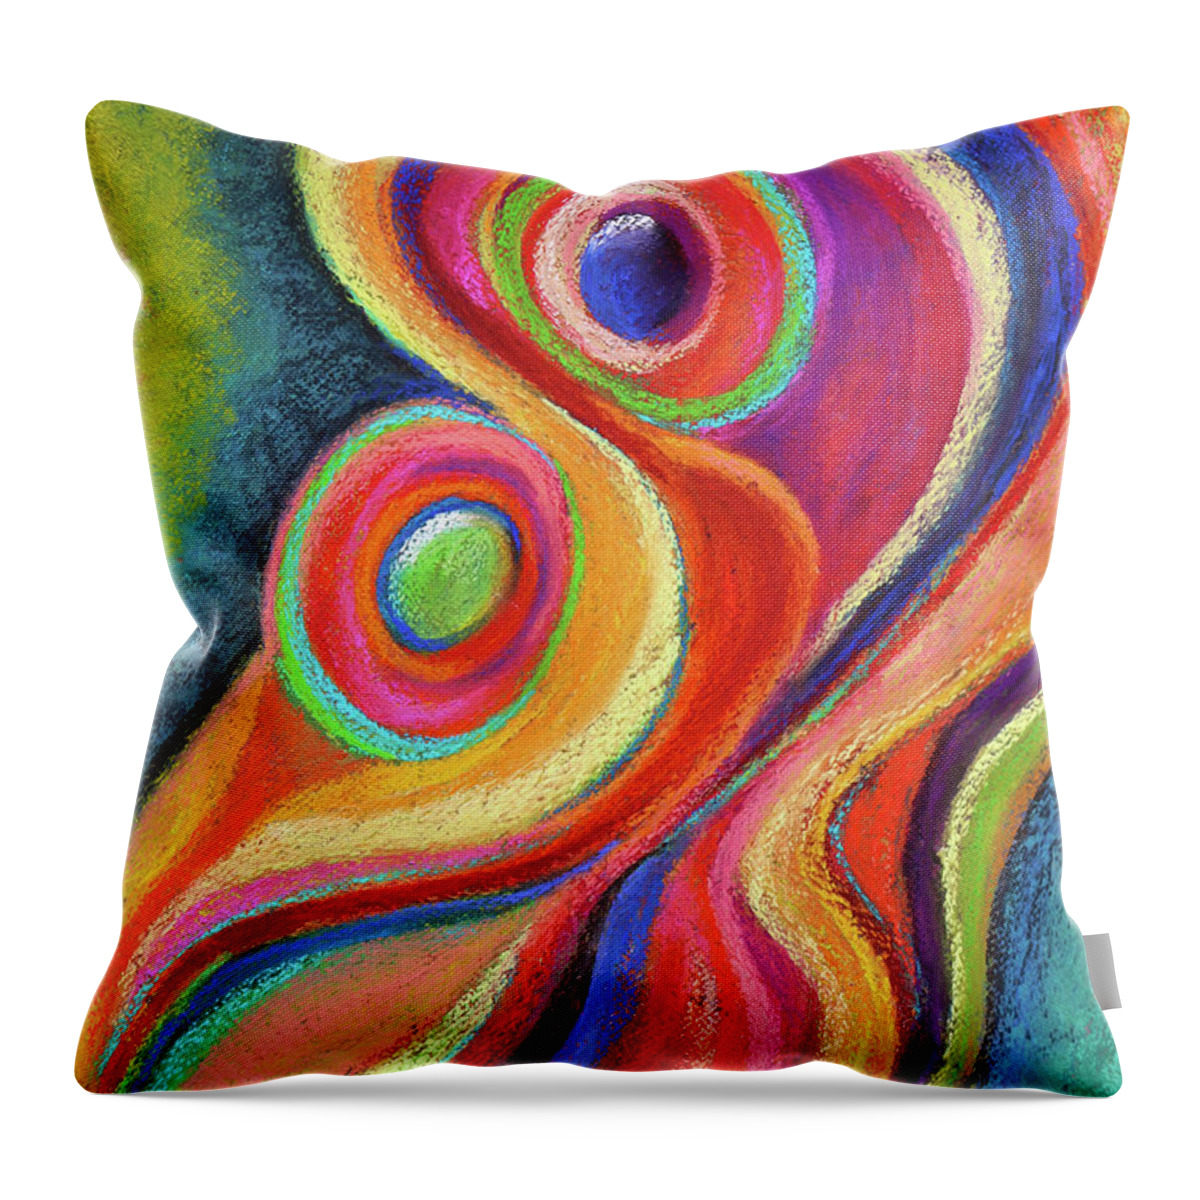  Throw Pillow featuring the painting Between Mother and Child by Polly Castor